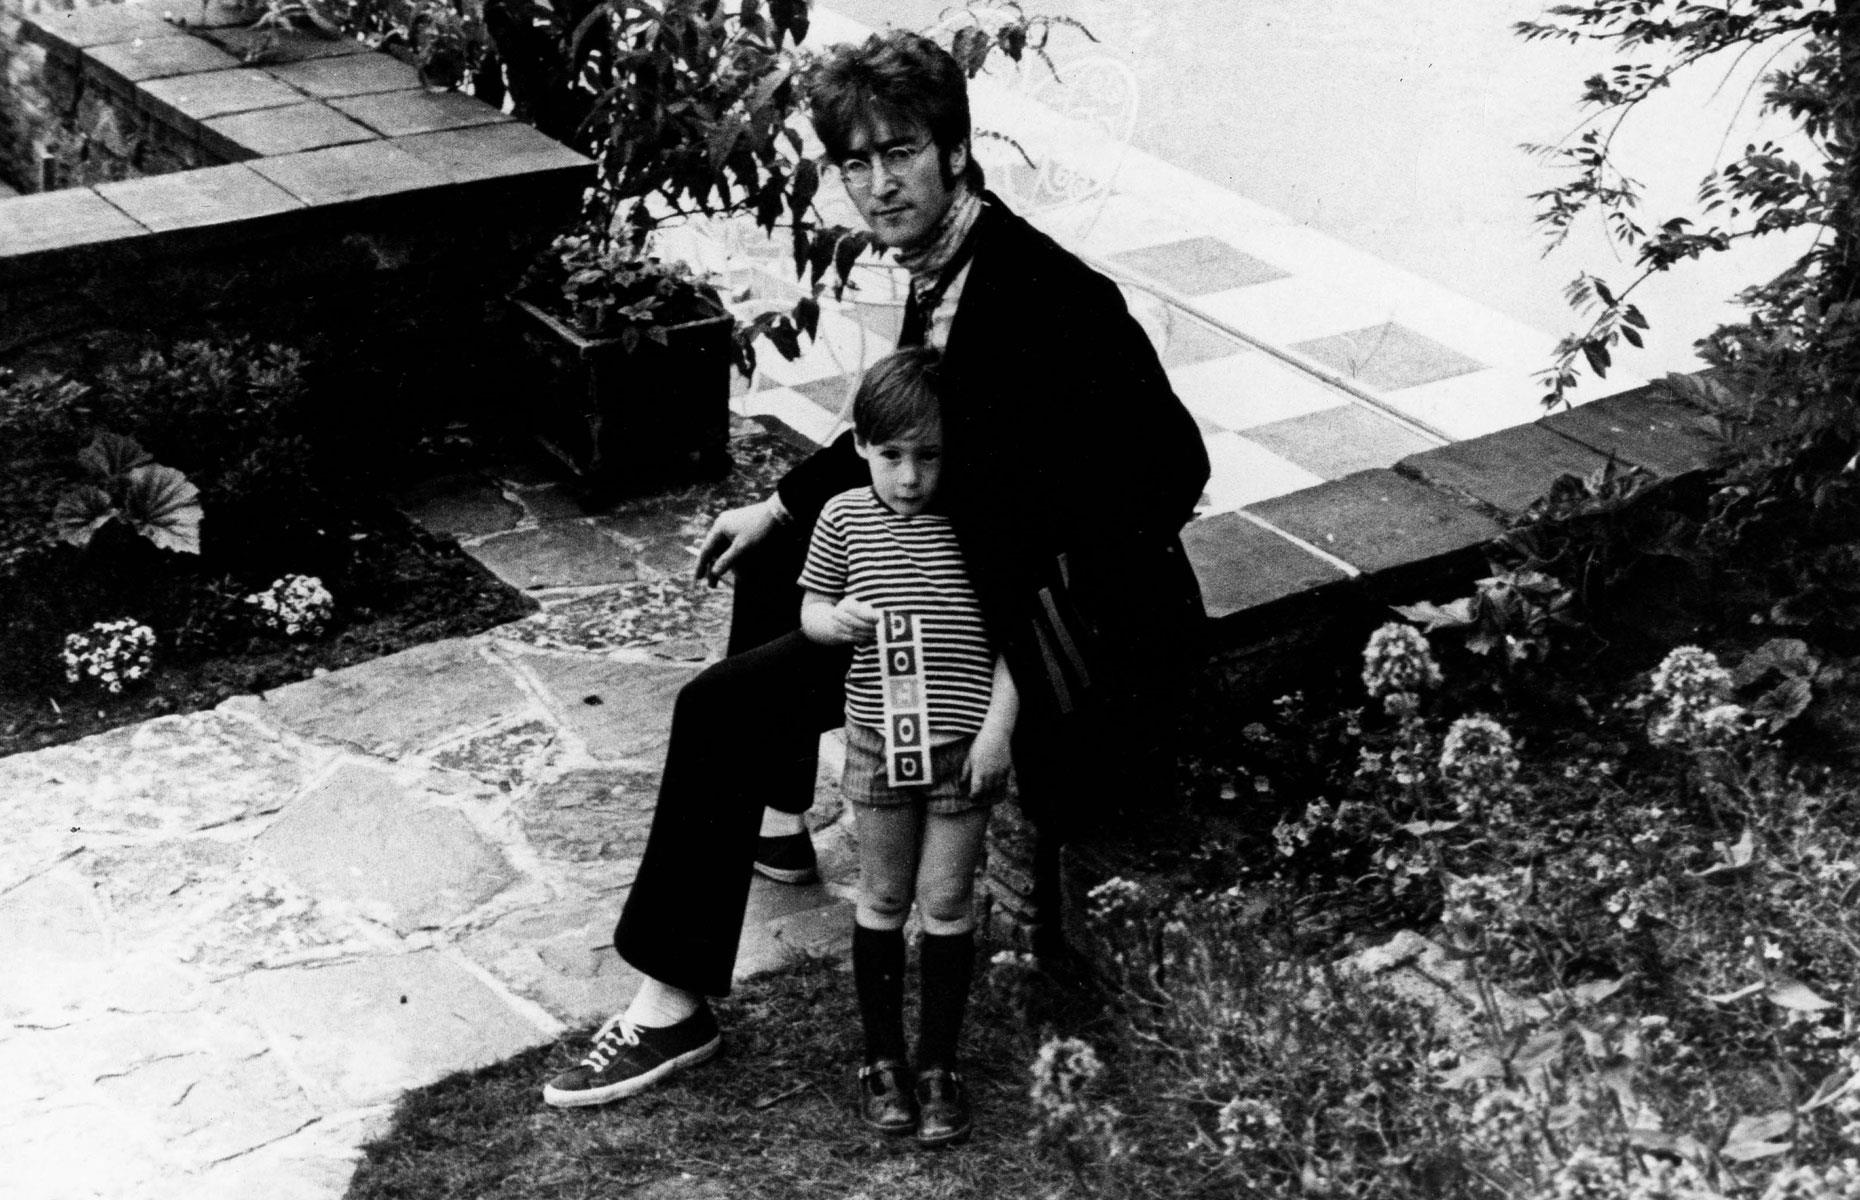 <p>Julian Lennon, John Lennon's son from his first marriage to Cynthia Powell, was born in 1962.</p>  <p>John wrote the Beatles classic <em>Hey Jude </em>for his son but, after he left Cynthia for Yoko Ono in 1968, their relationship broke down. Julian rarely saw his father during his childhood, although the pair reconciled before John's 1980 murder.</p>  <p>Julian followed in the footsteps of his dad by embarking on a music career all of his own.</p>